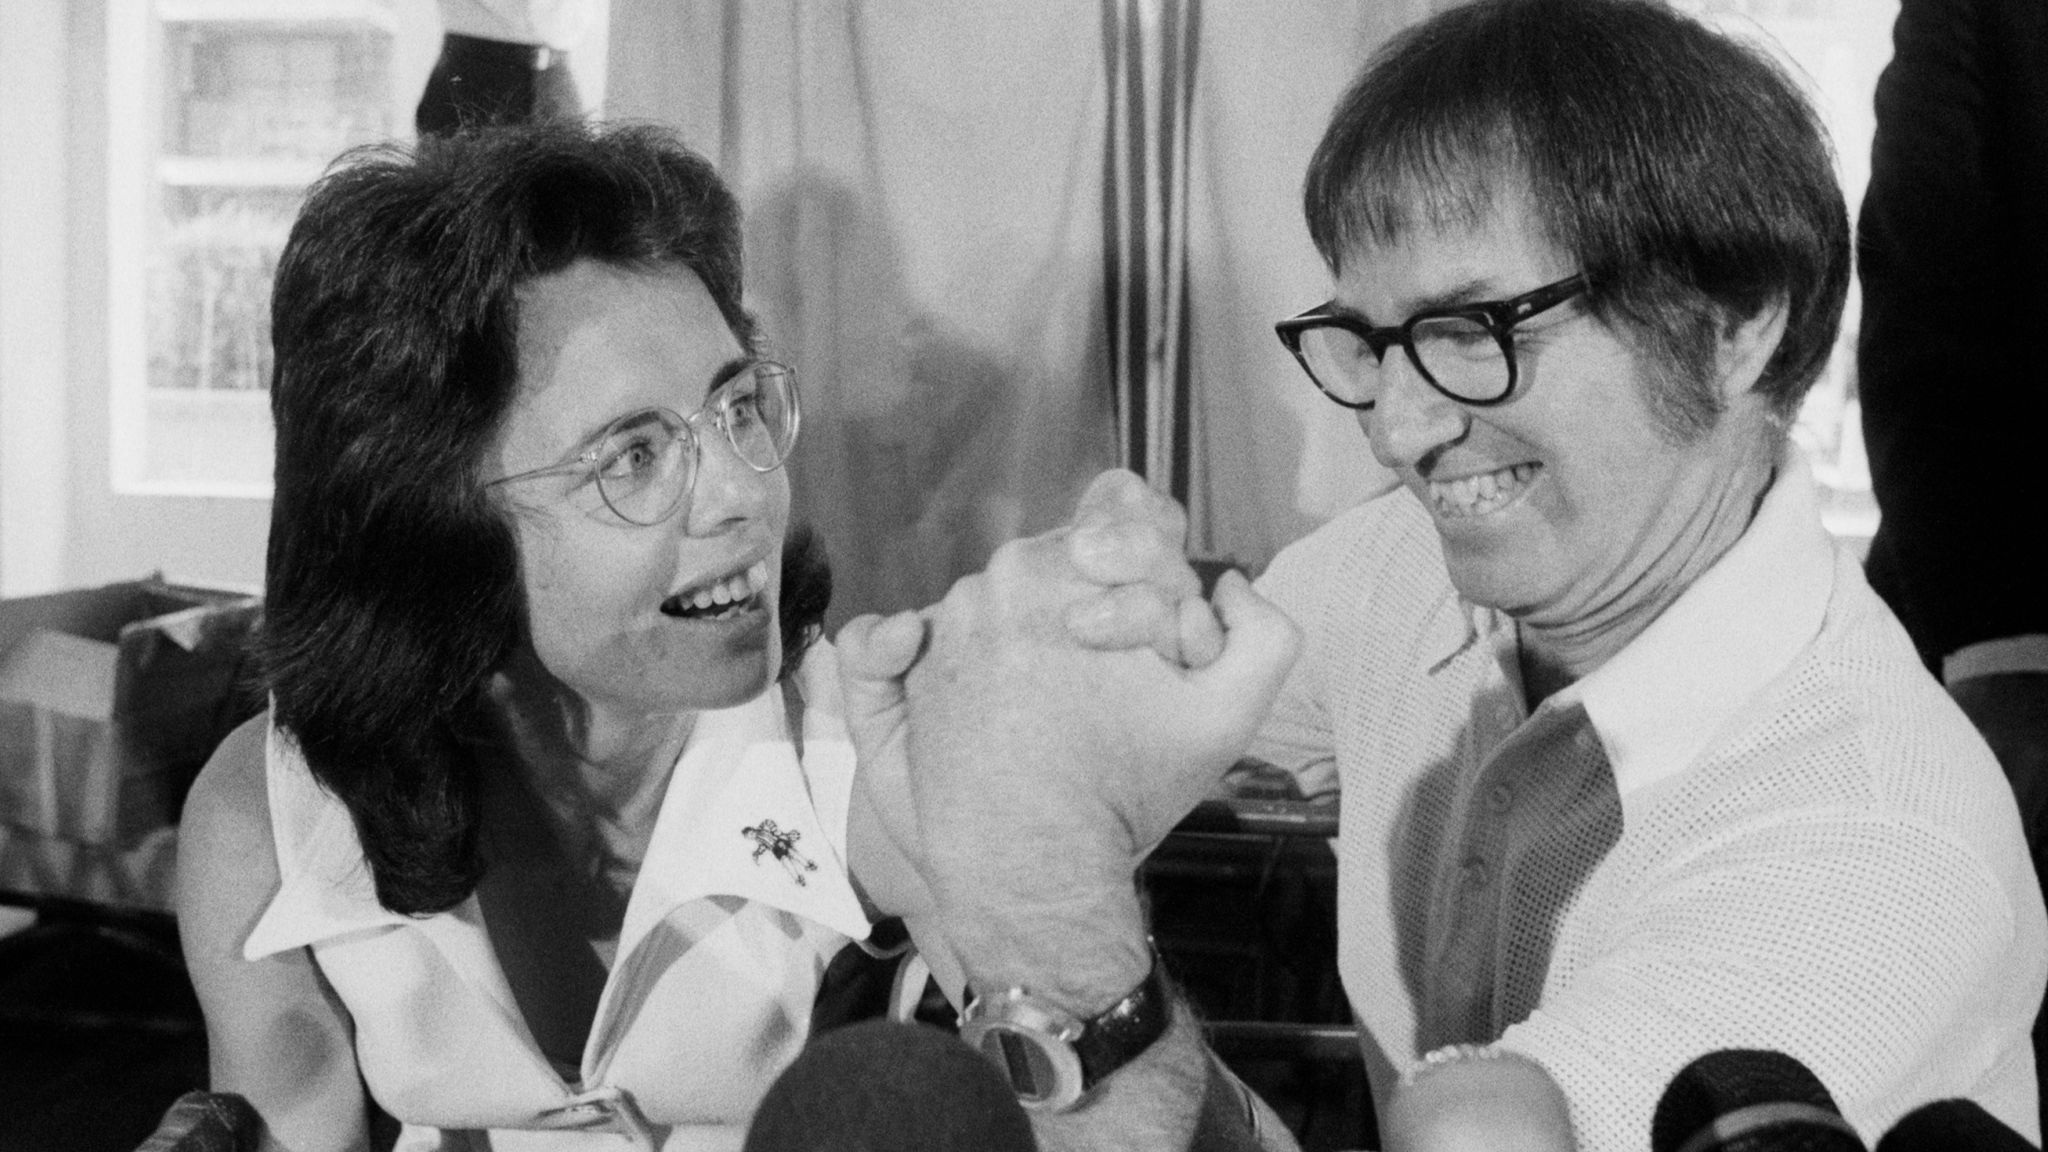 Battle of the Sexes, Billie Jean King v Bobby Riggs by Louise